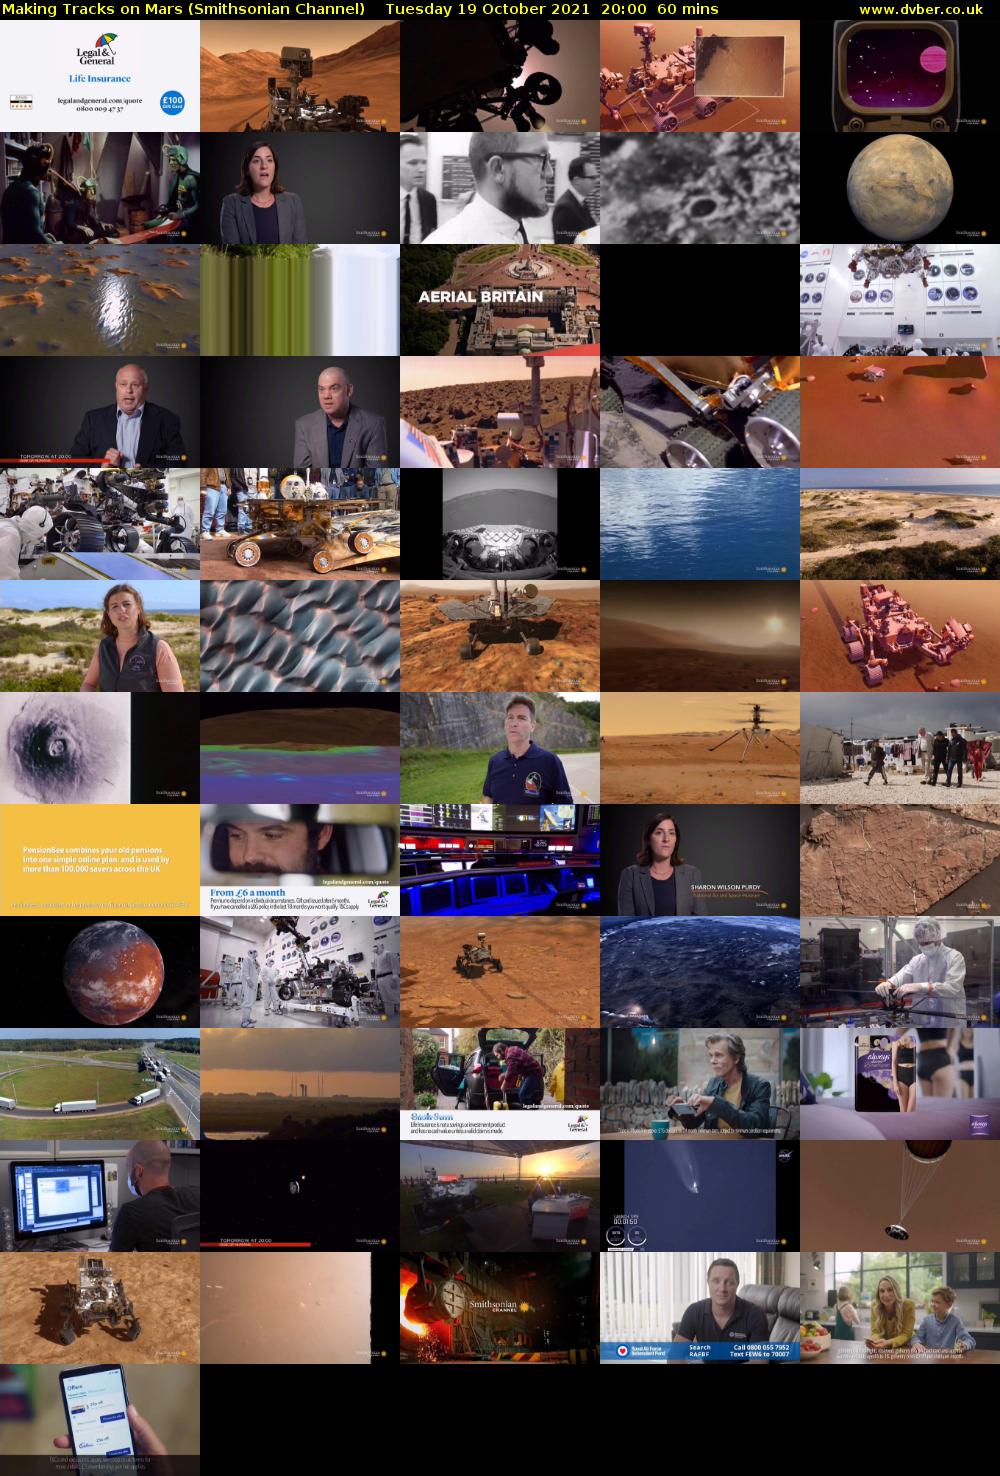 Making Tracks on Mars (Smithsonian Channel) Tuesday 19 October 2021 20:00 - 21:00